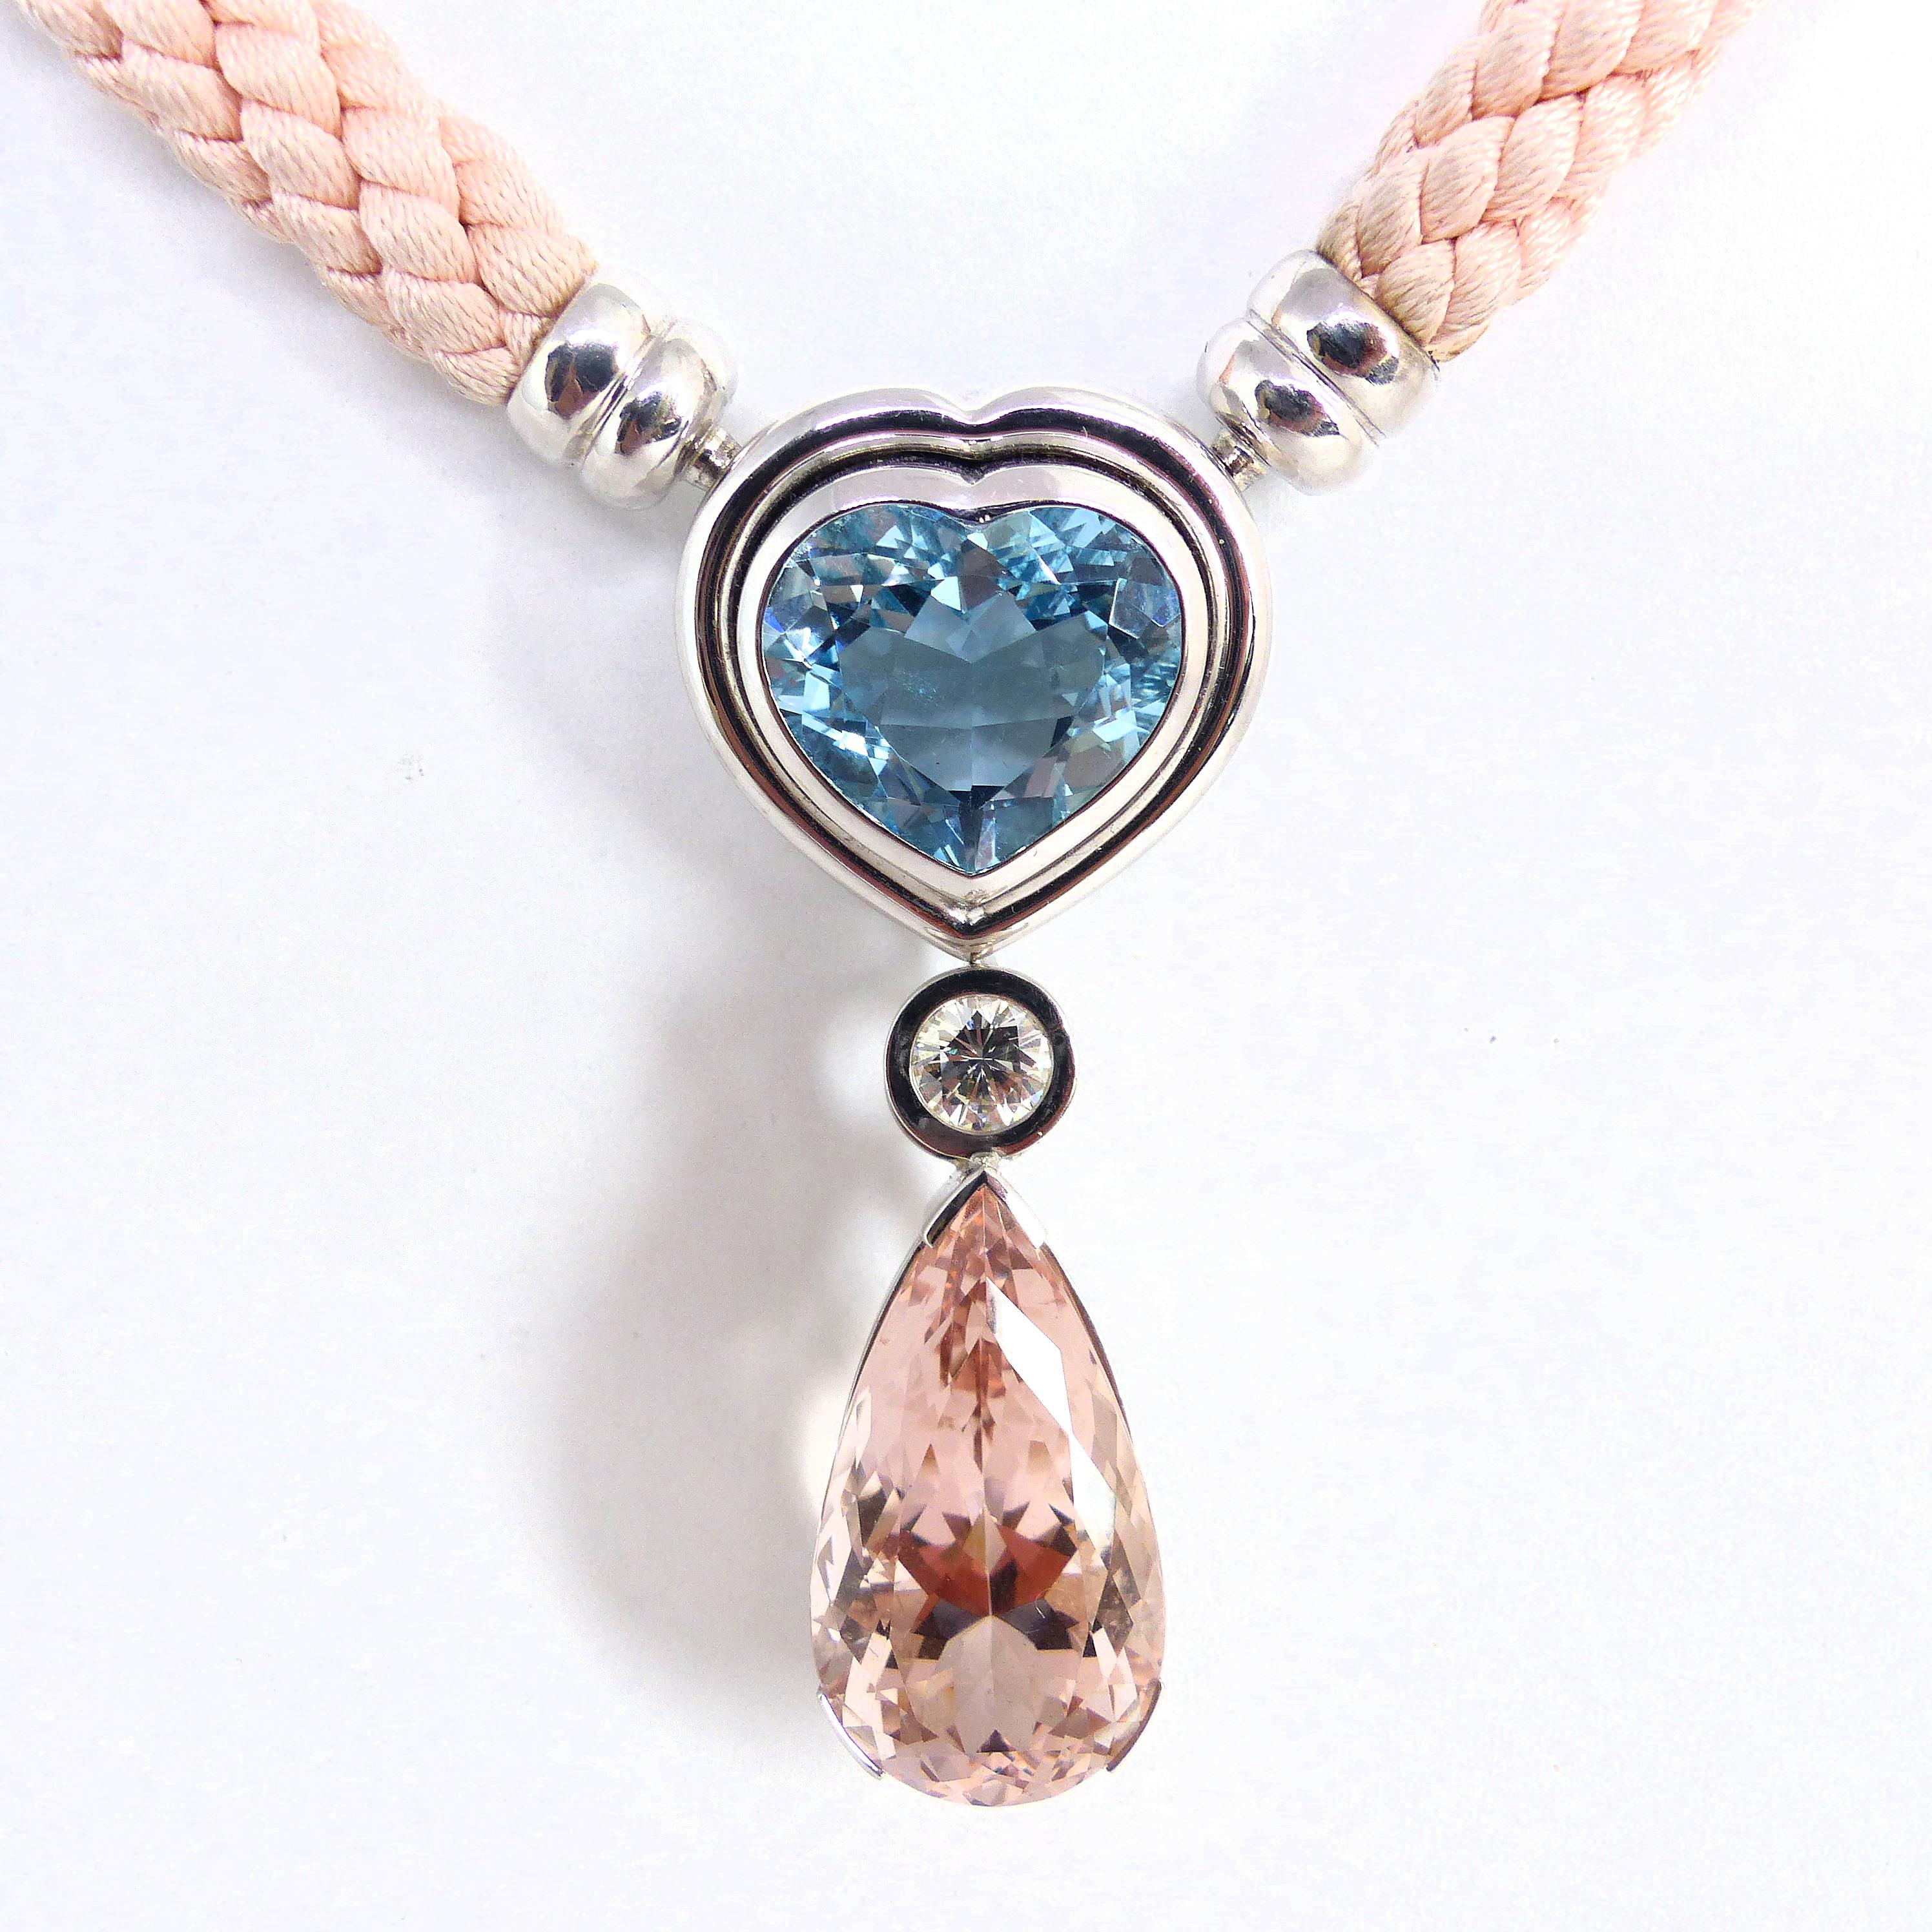 Heart Cut Necklace in White Gold with 1 Morganite and 1 Aquamarine and 1 Diamond. For Sale